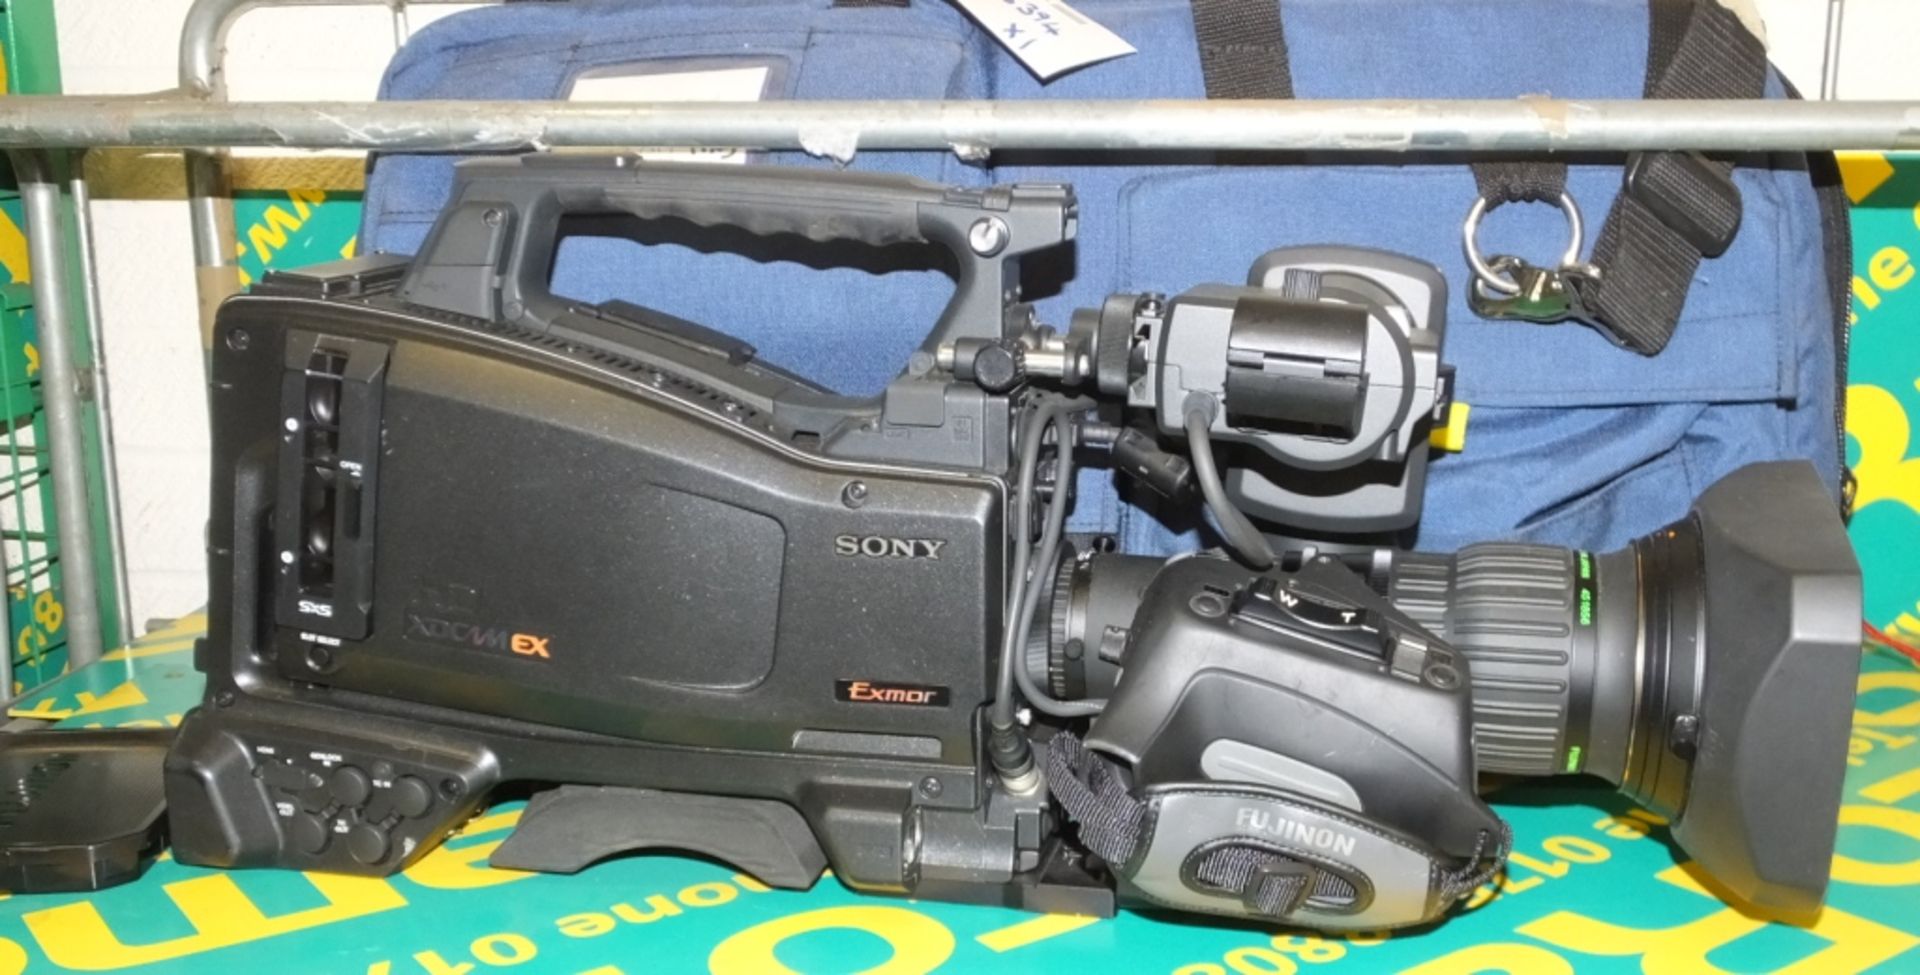 Sony PMW-350 Professional Camcorder with carry bag - no other accessories - Image 8 of 10